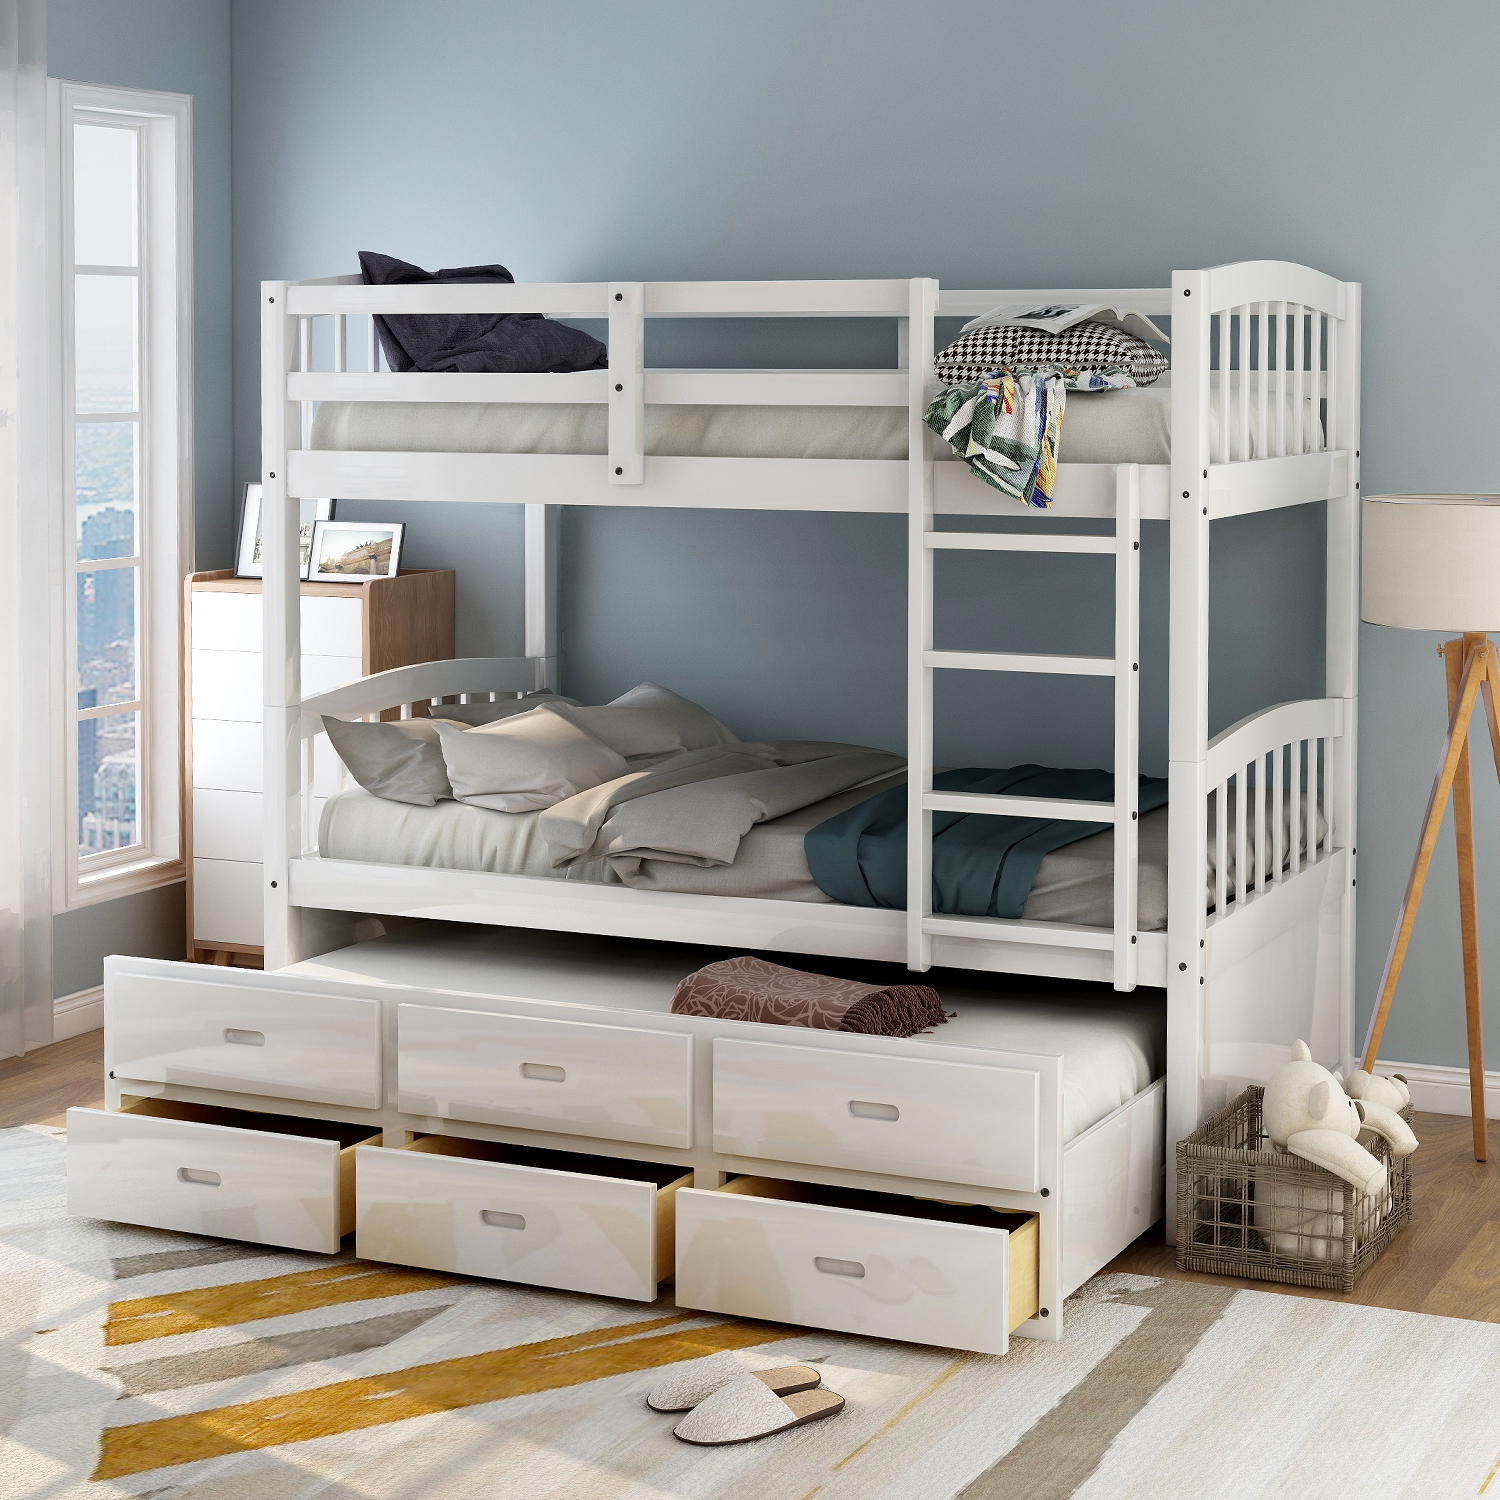 Euroco Twin Over Twin Wood Bunk Bed with Trundle and Drawers, White - image 1 of 13